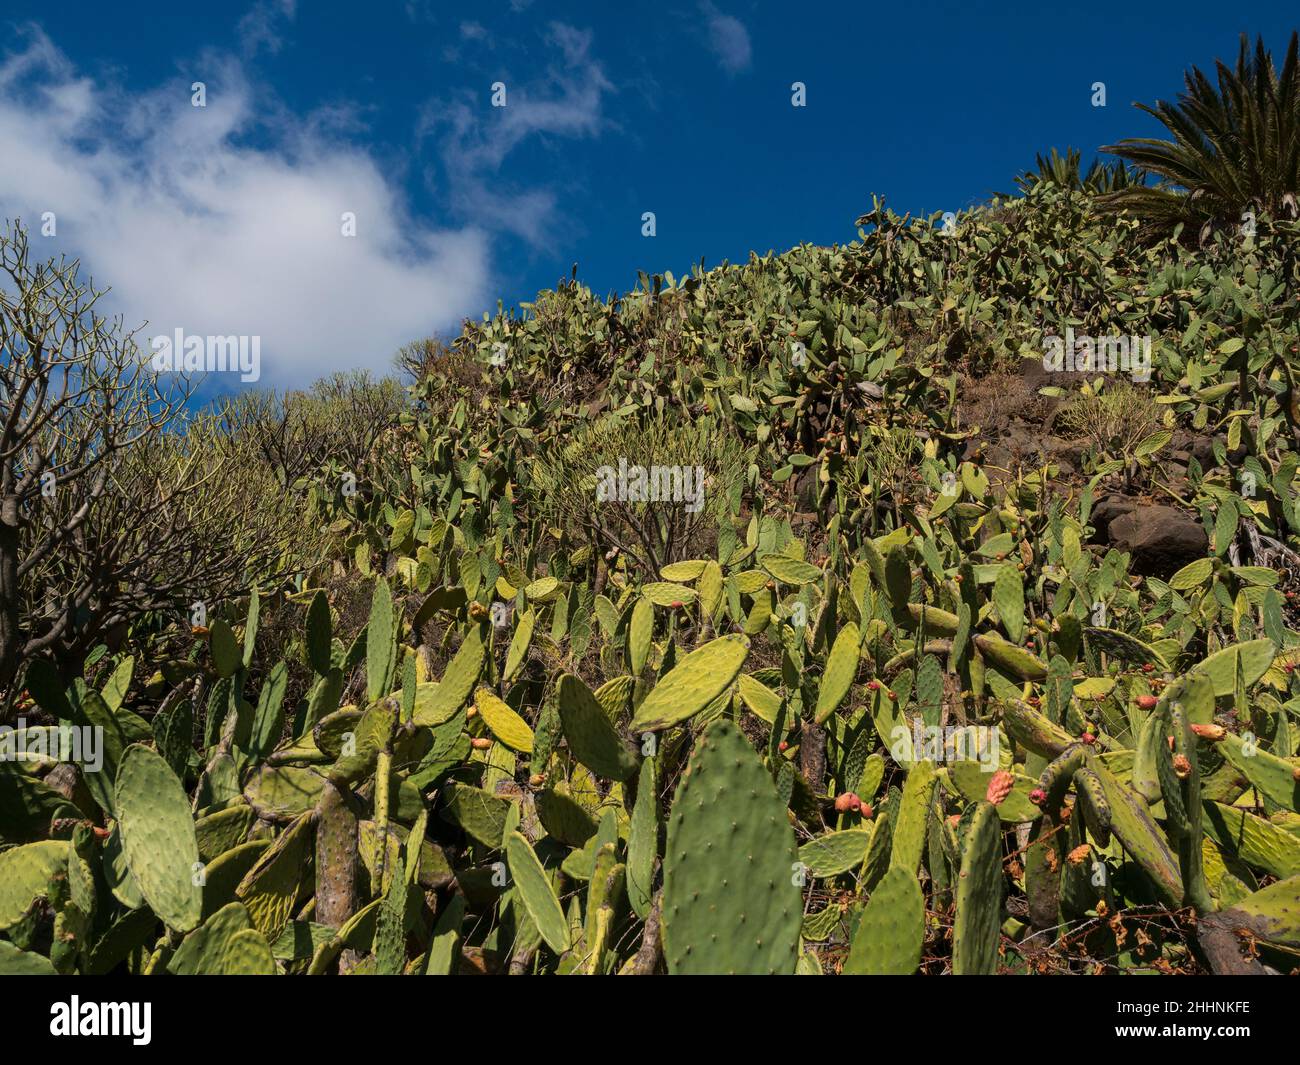 Prickly pears onb hillside in Teno Mountains, Tenerife. Stock Photo